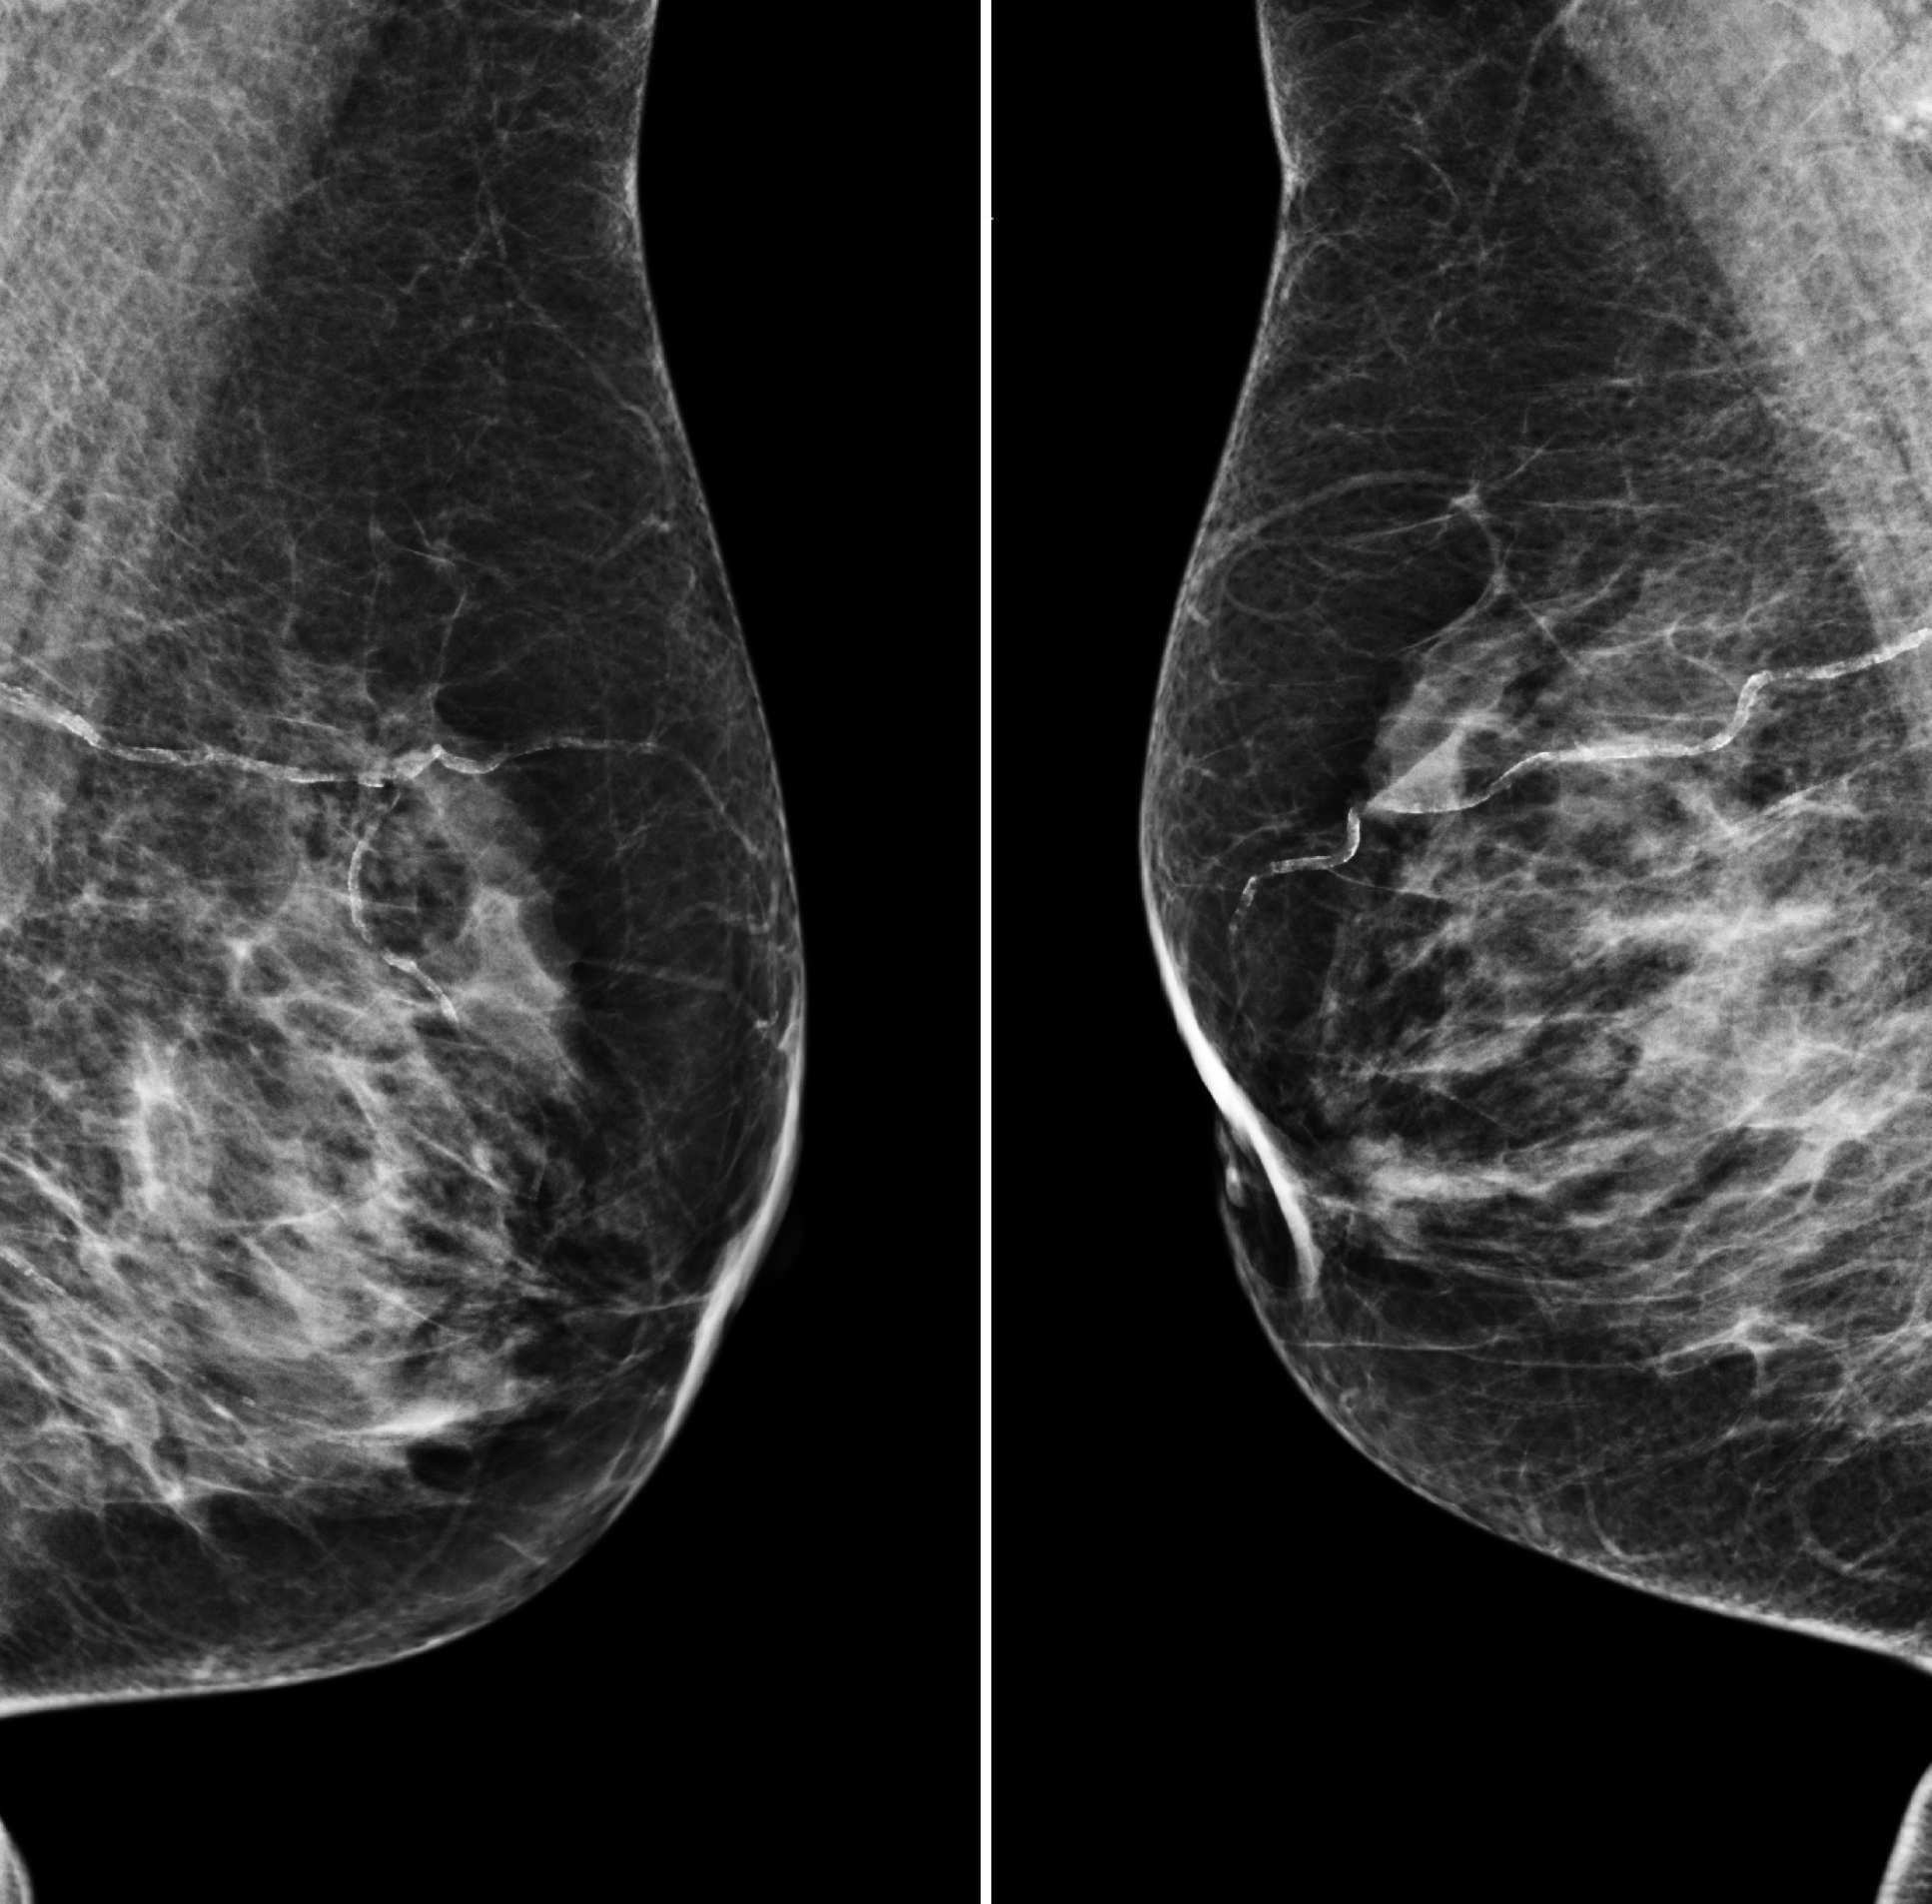 Image showing two mammograms side by side